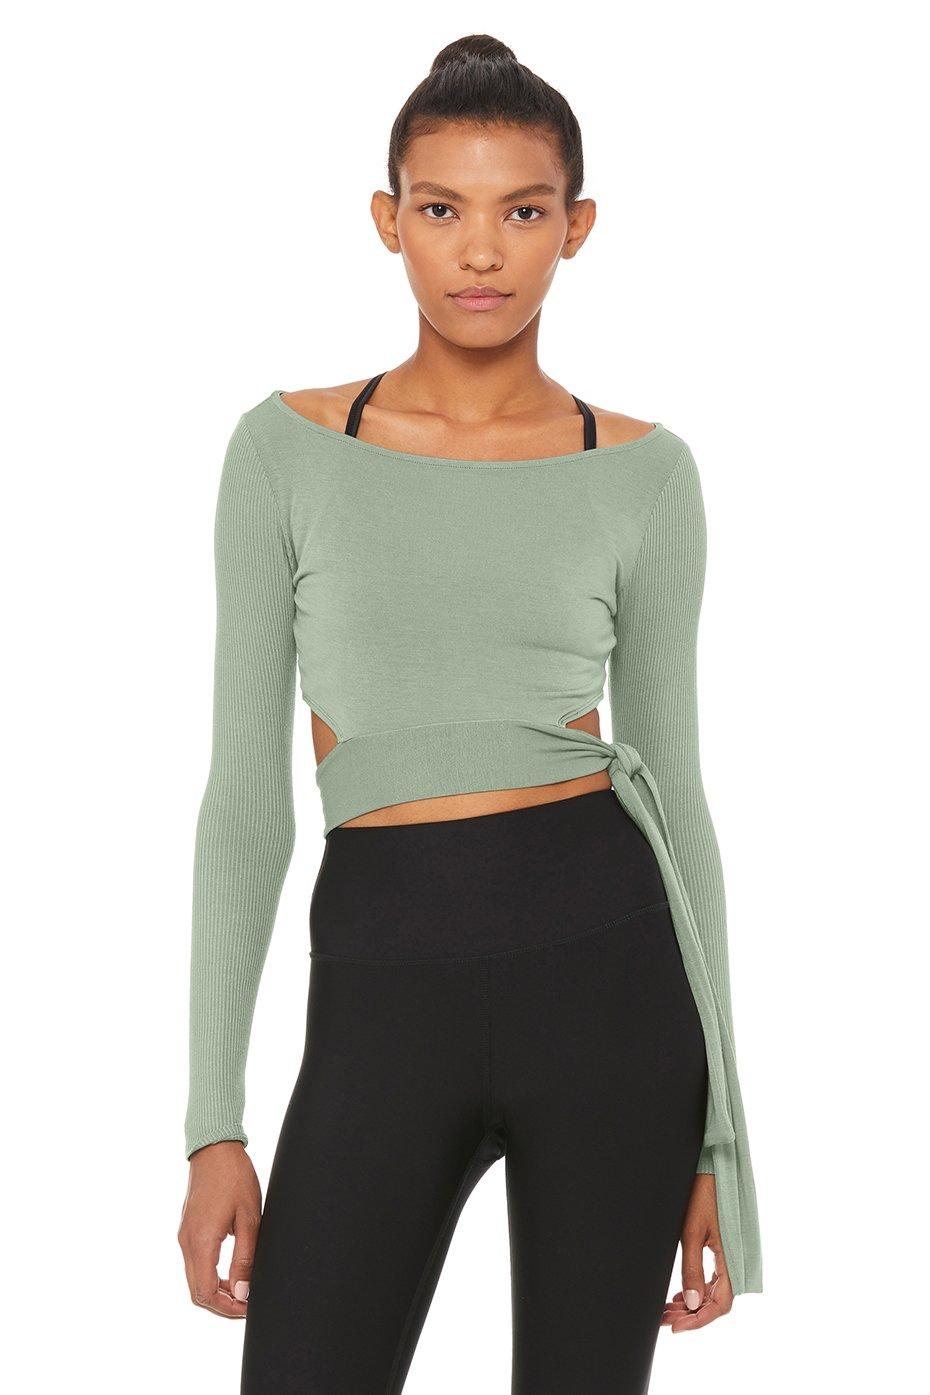 Alo Yoga Synthetic Barre Long Sleeve in Moss (Green) - Save 1% - Lyst